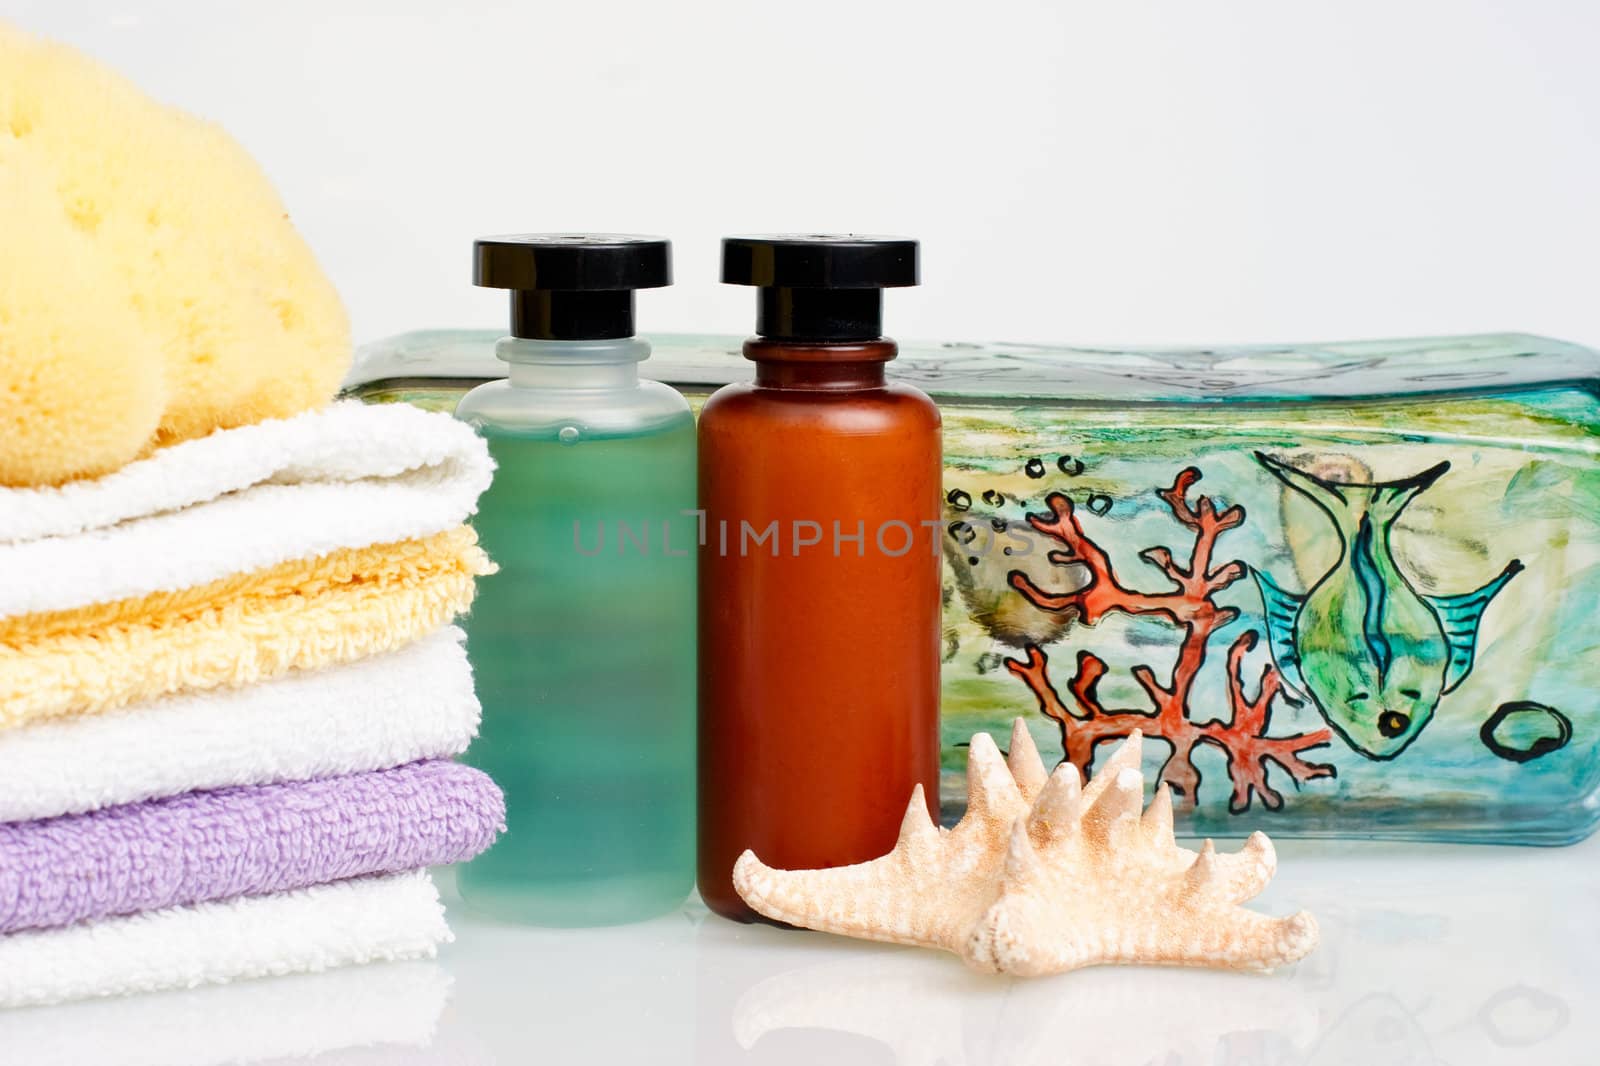 Collection of various spa or bath accessories